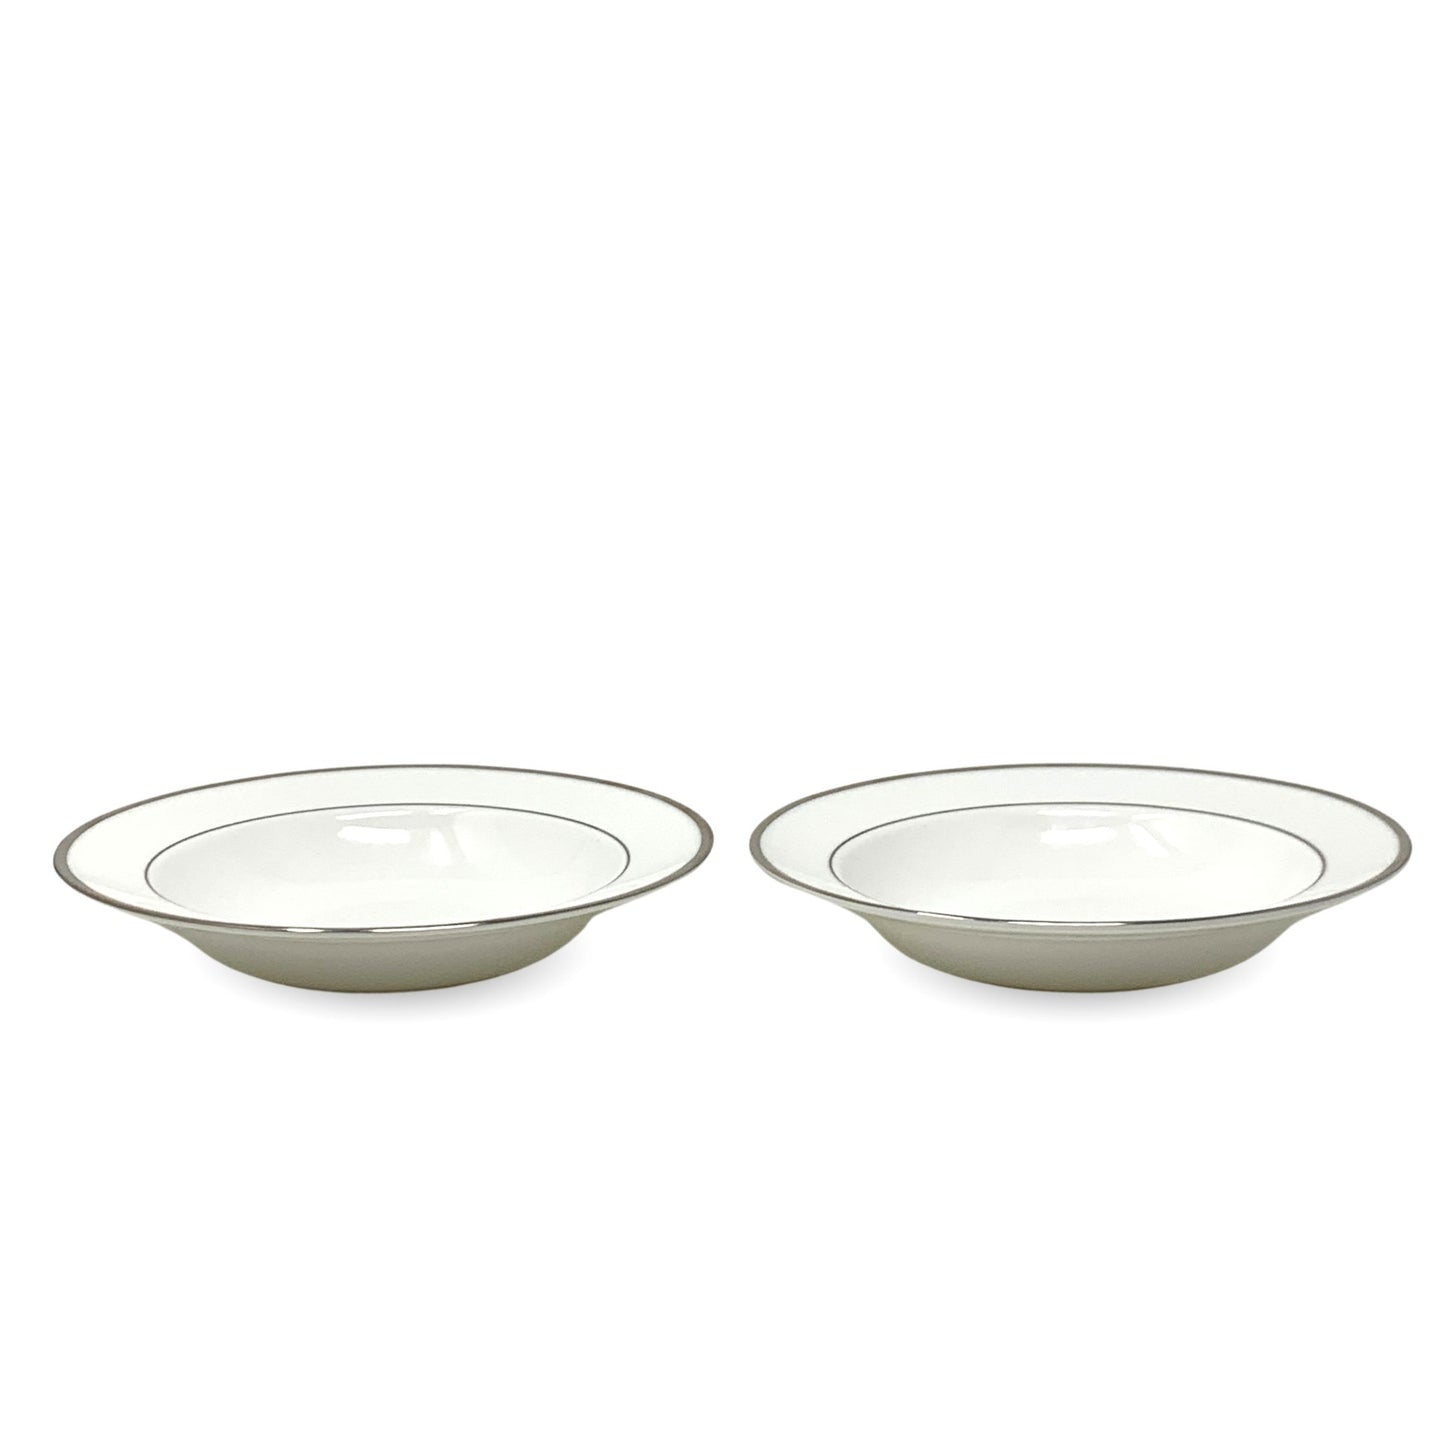 Pair of Wedgwood "Sterling" Bone China Rimmed Soup Bowls